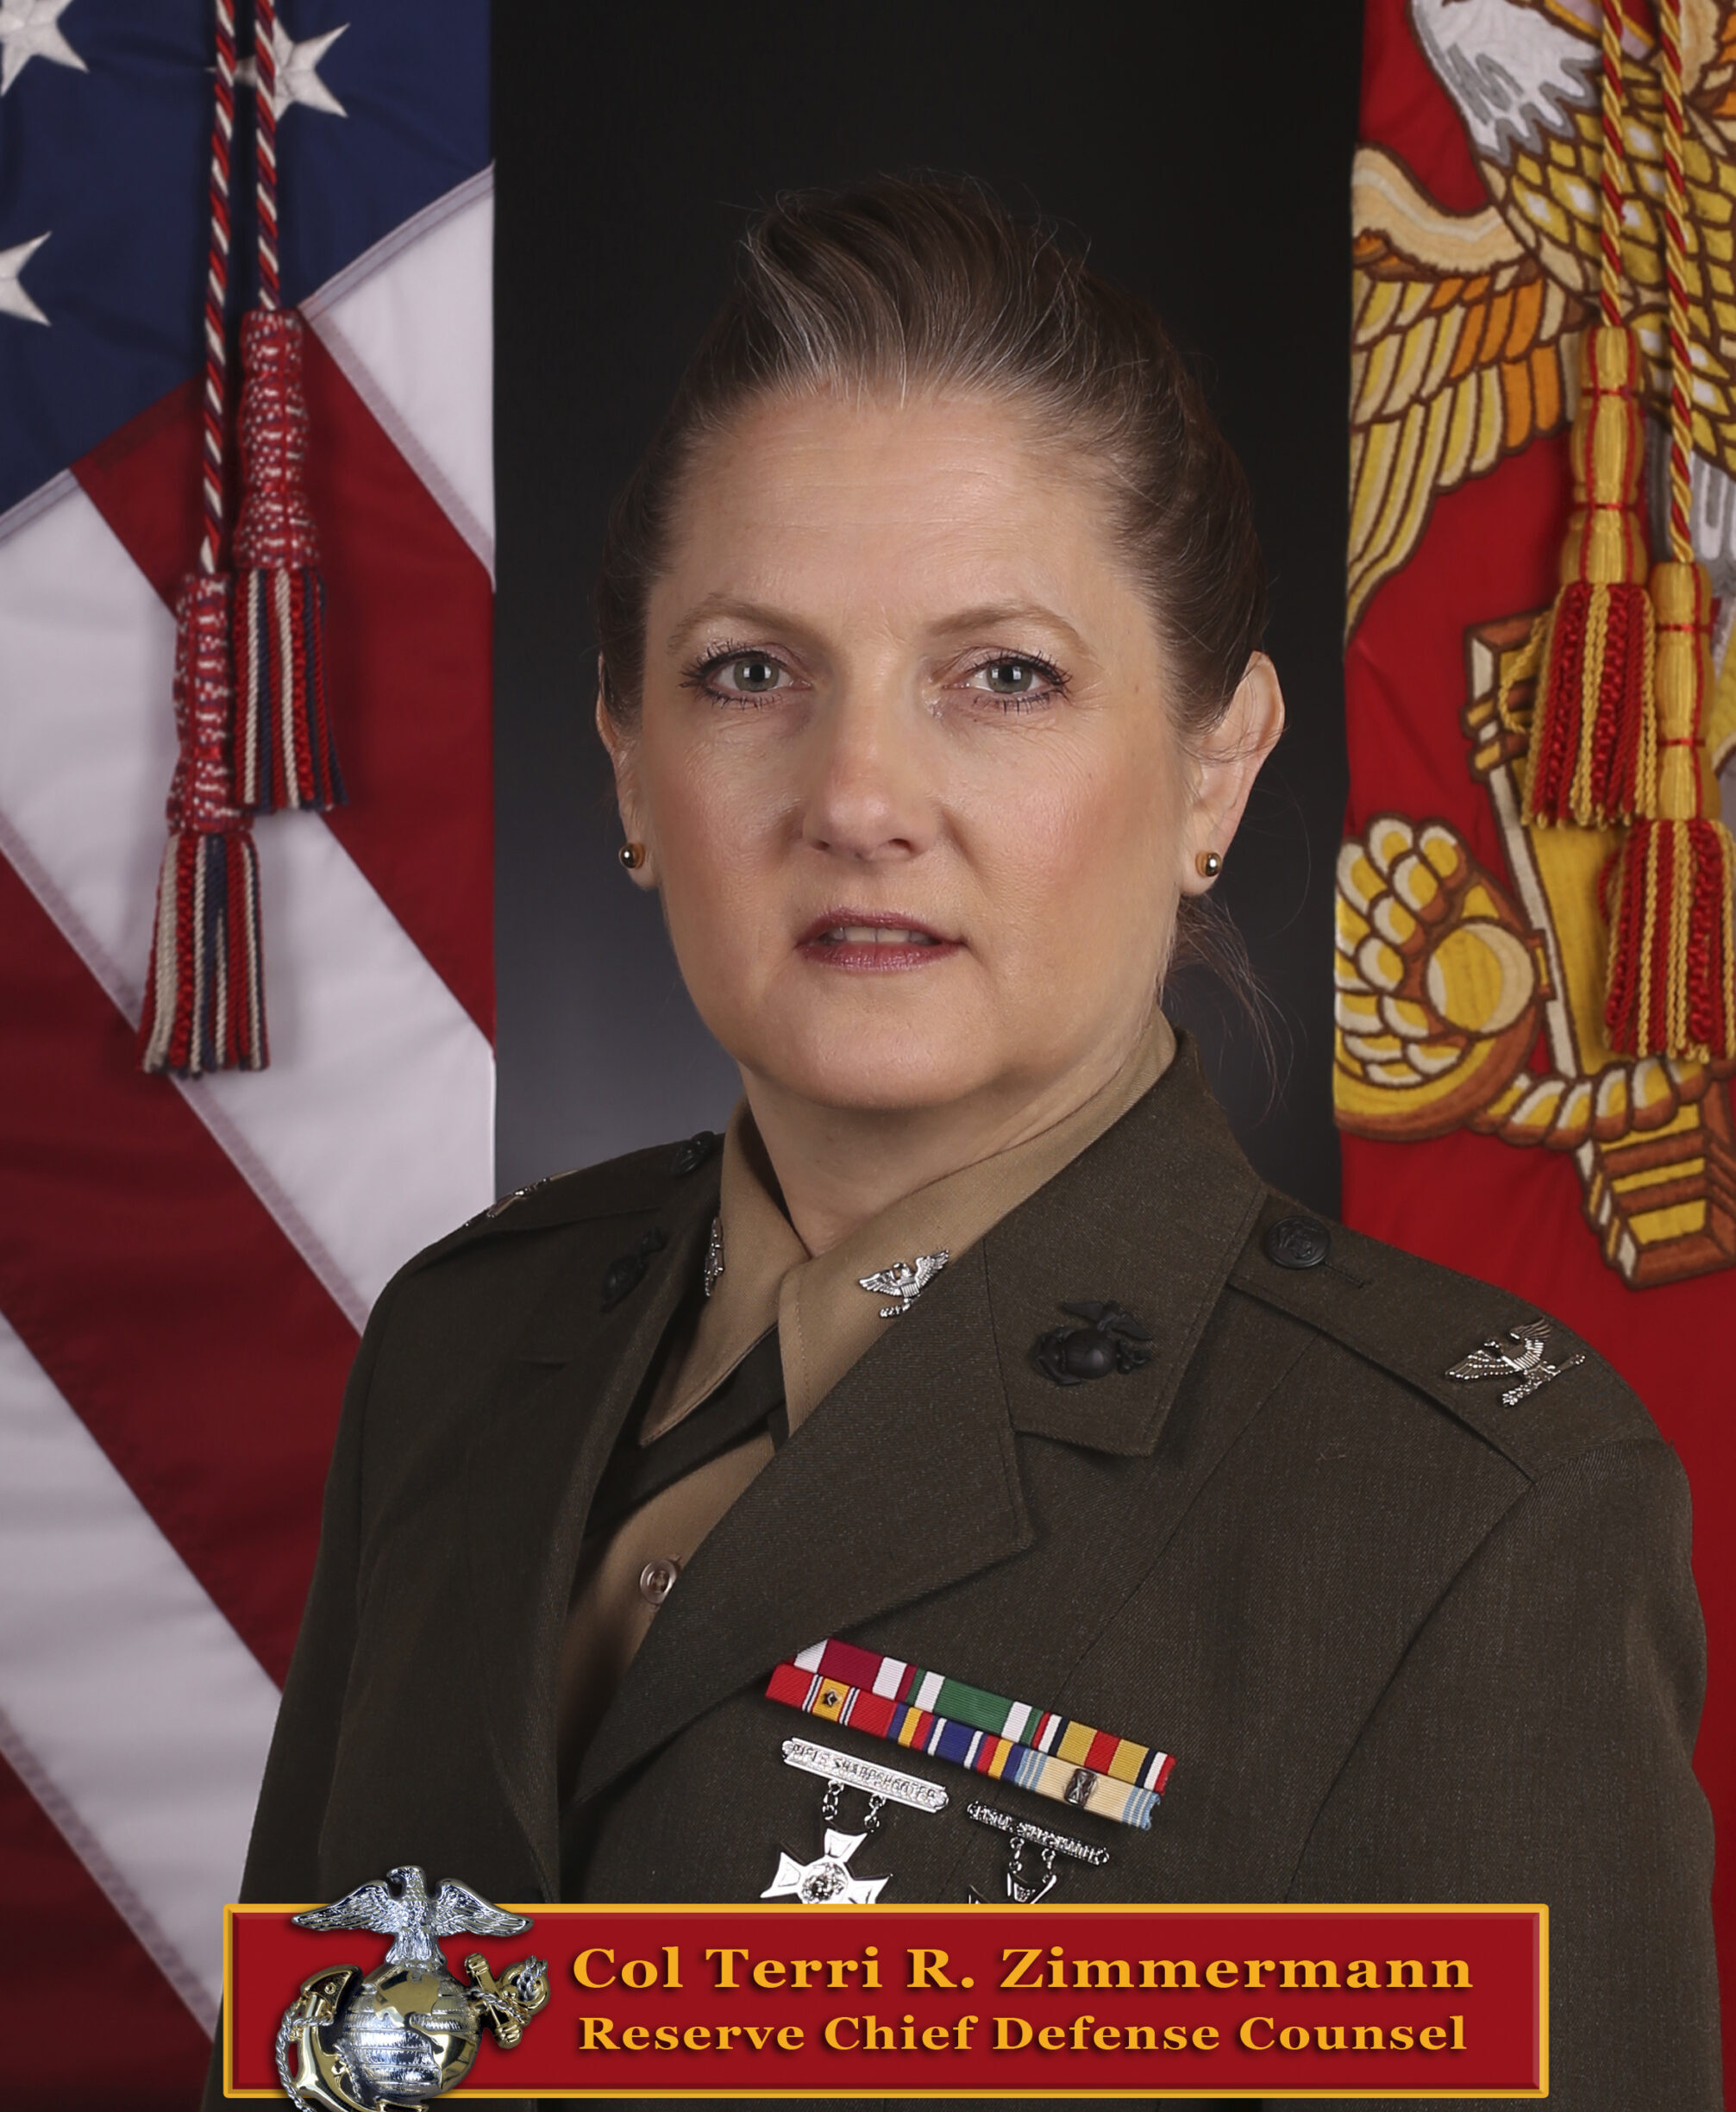 Colonel Terri Zimmermann now Reserve Chief Defense Counsel of the Marine Corps